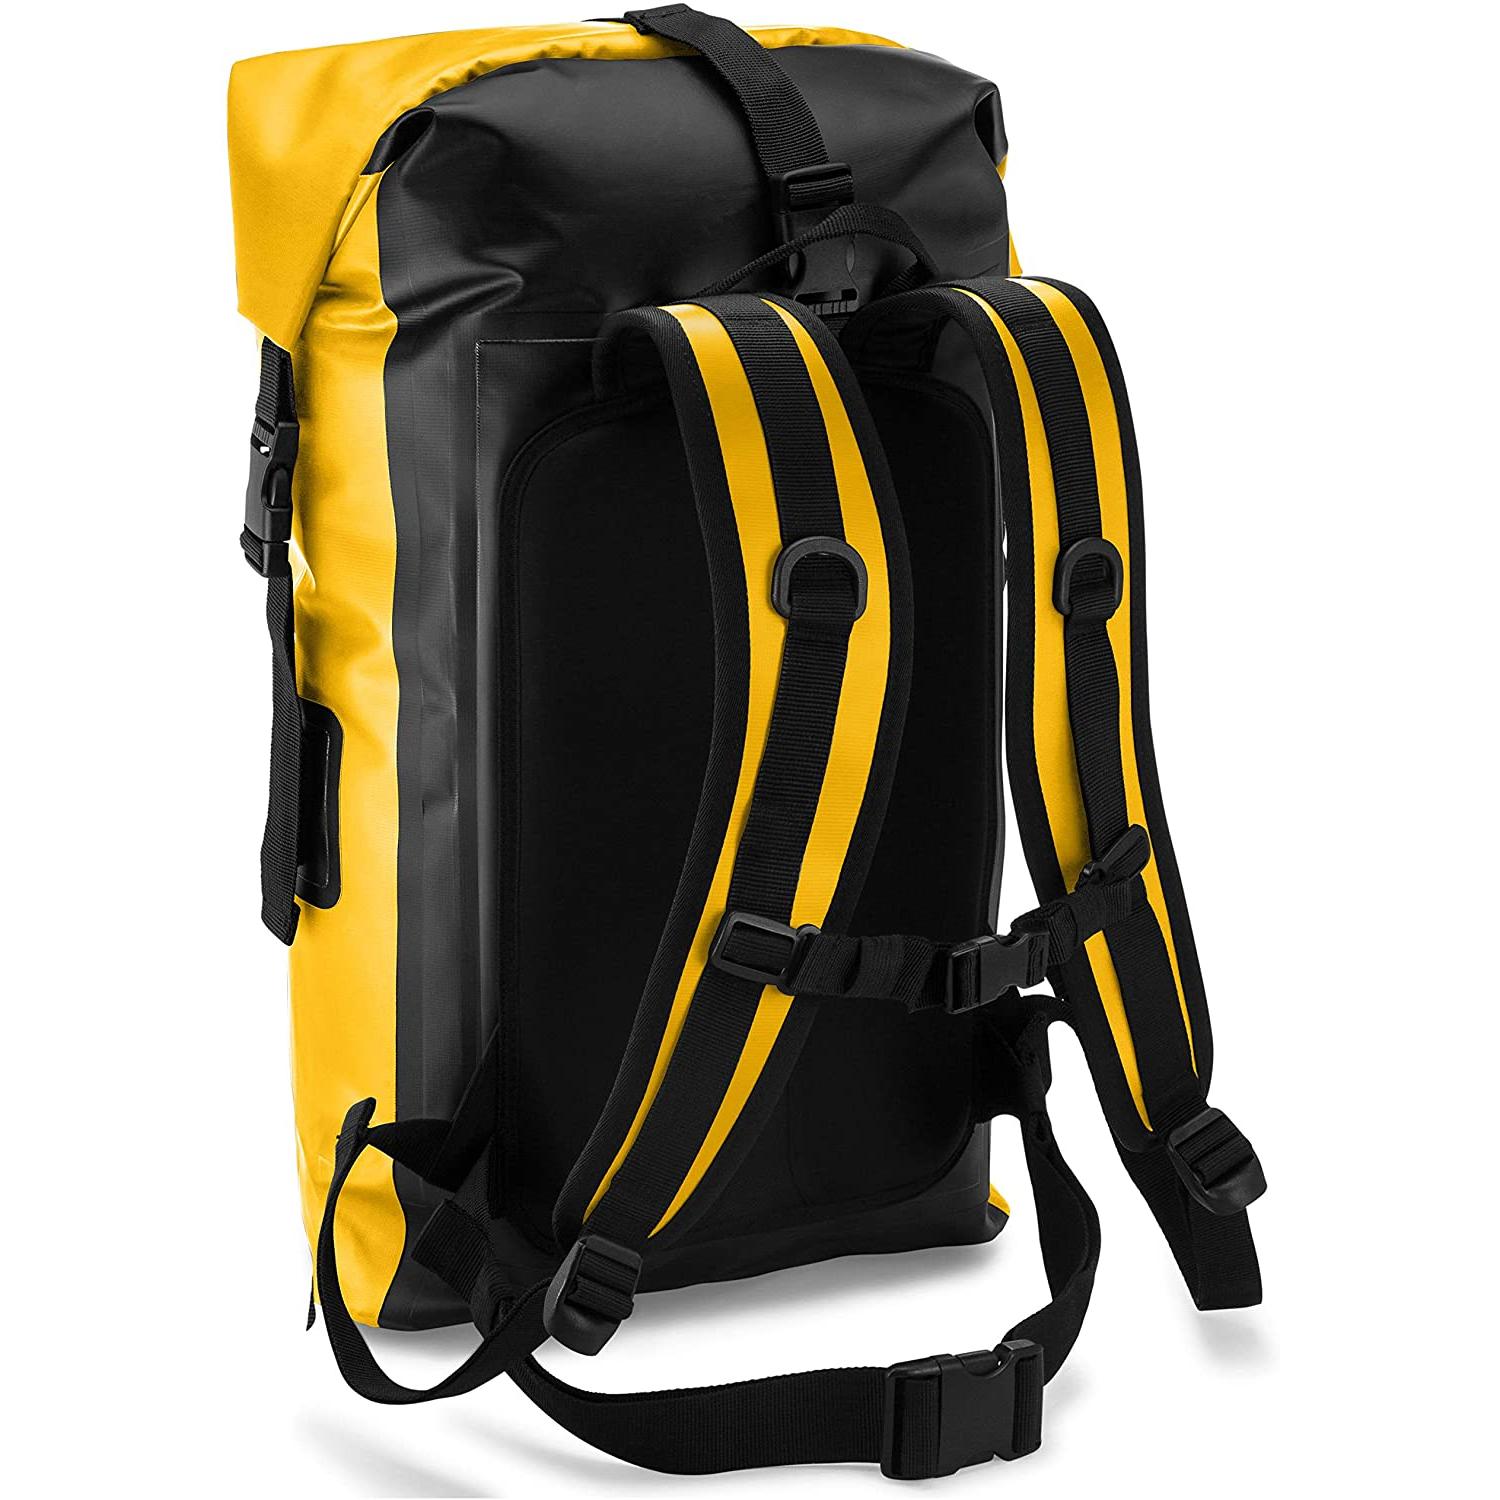 Earth Pak Waterproof Backpack: 35L & 55L Roll-Top Closure with Easy Access Front-Zippered Pocket and Padded Back Panel